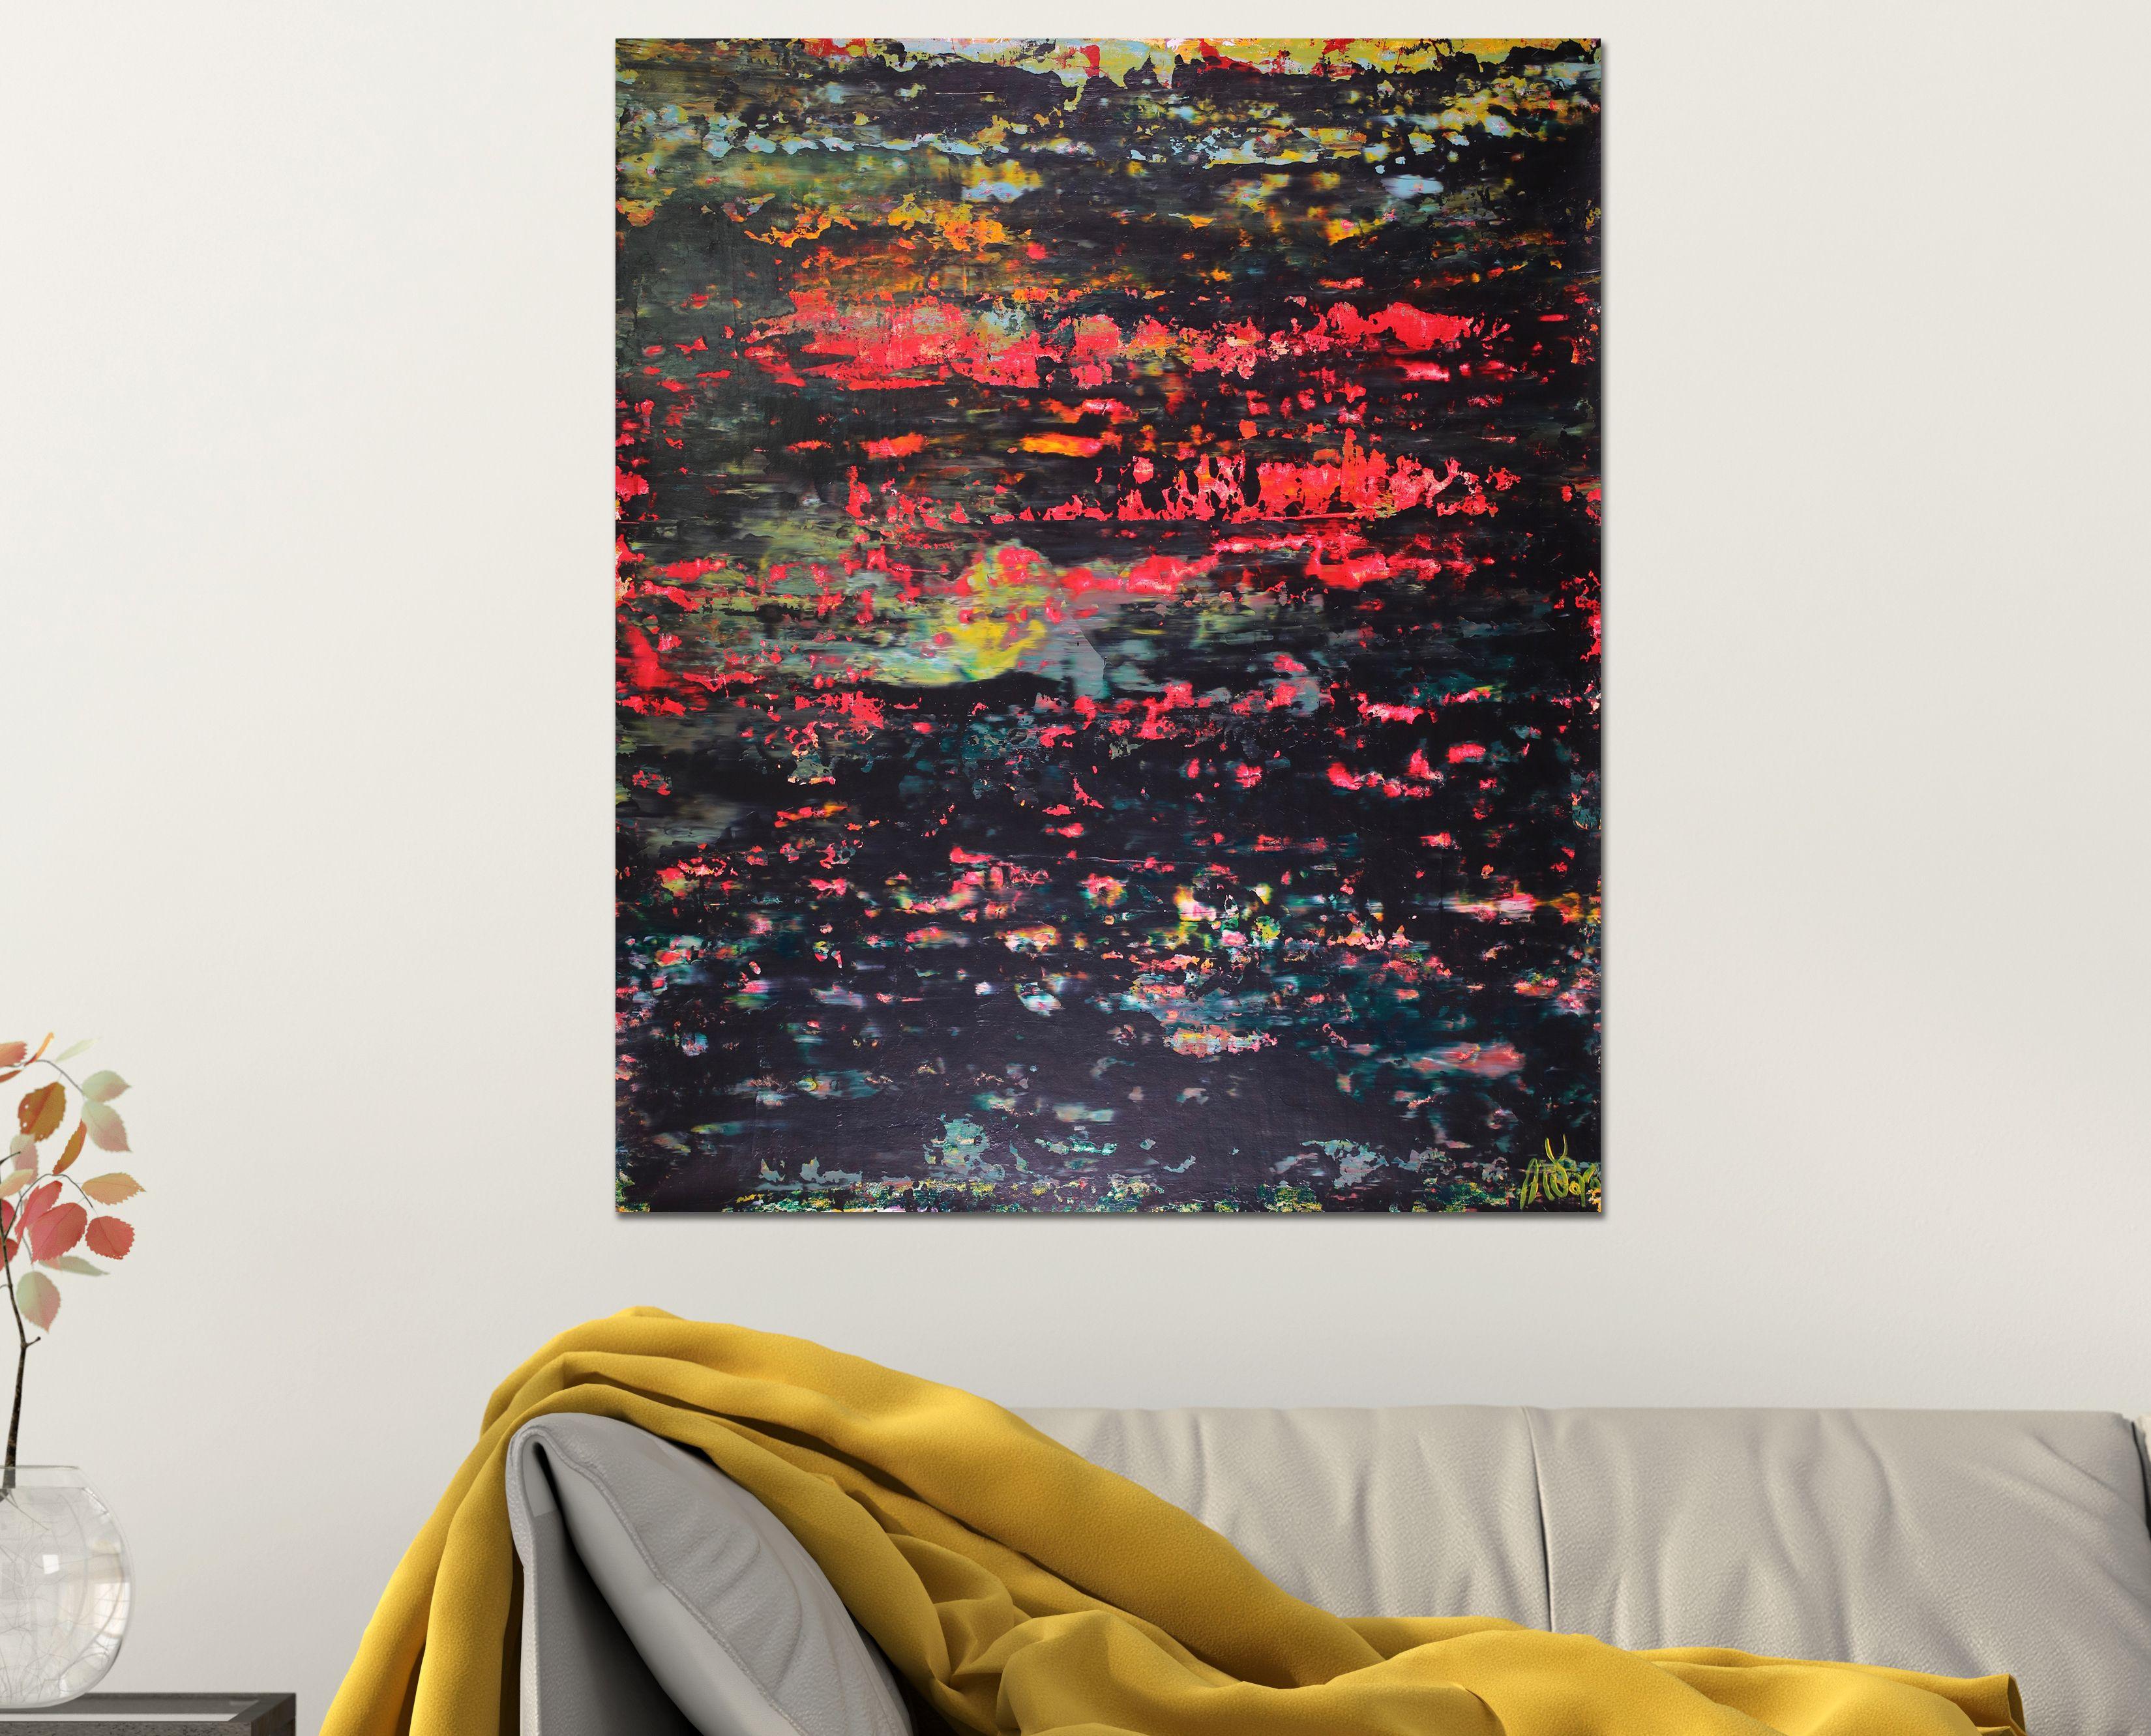 For this painting I decided to go very dark!!! with a bright background and bring colors coming through. Red, teal, yellow, and orange. Bold color field. Signed.    Done on a high quality loose canvas, shipped rolled in a tube. Simply take it to